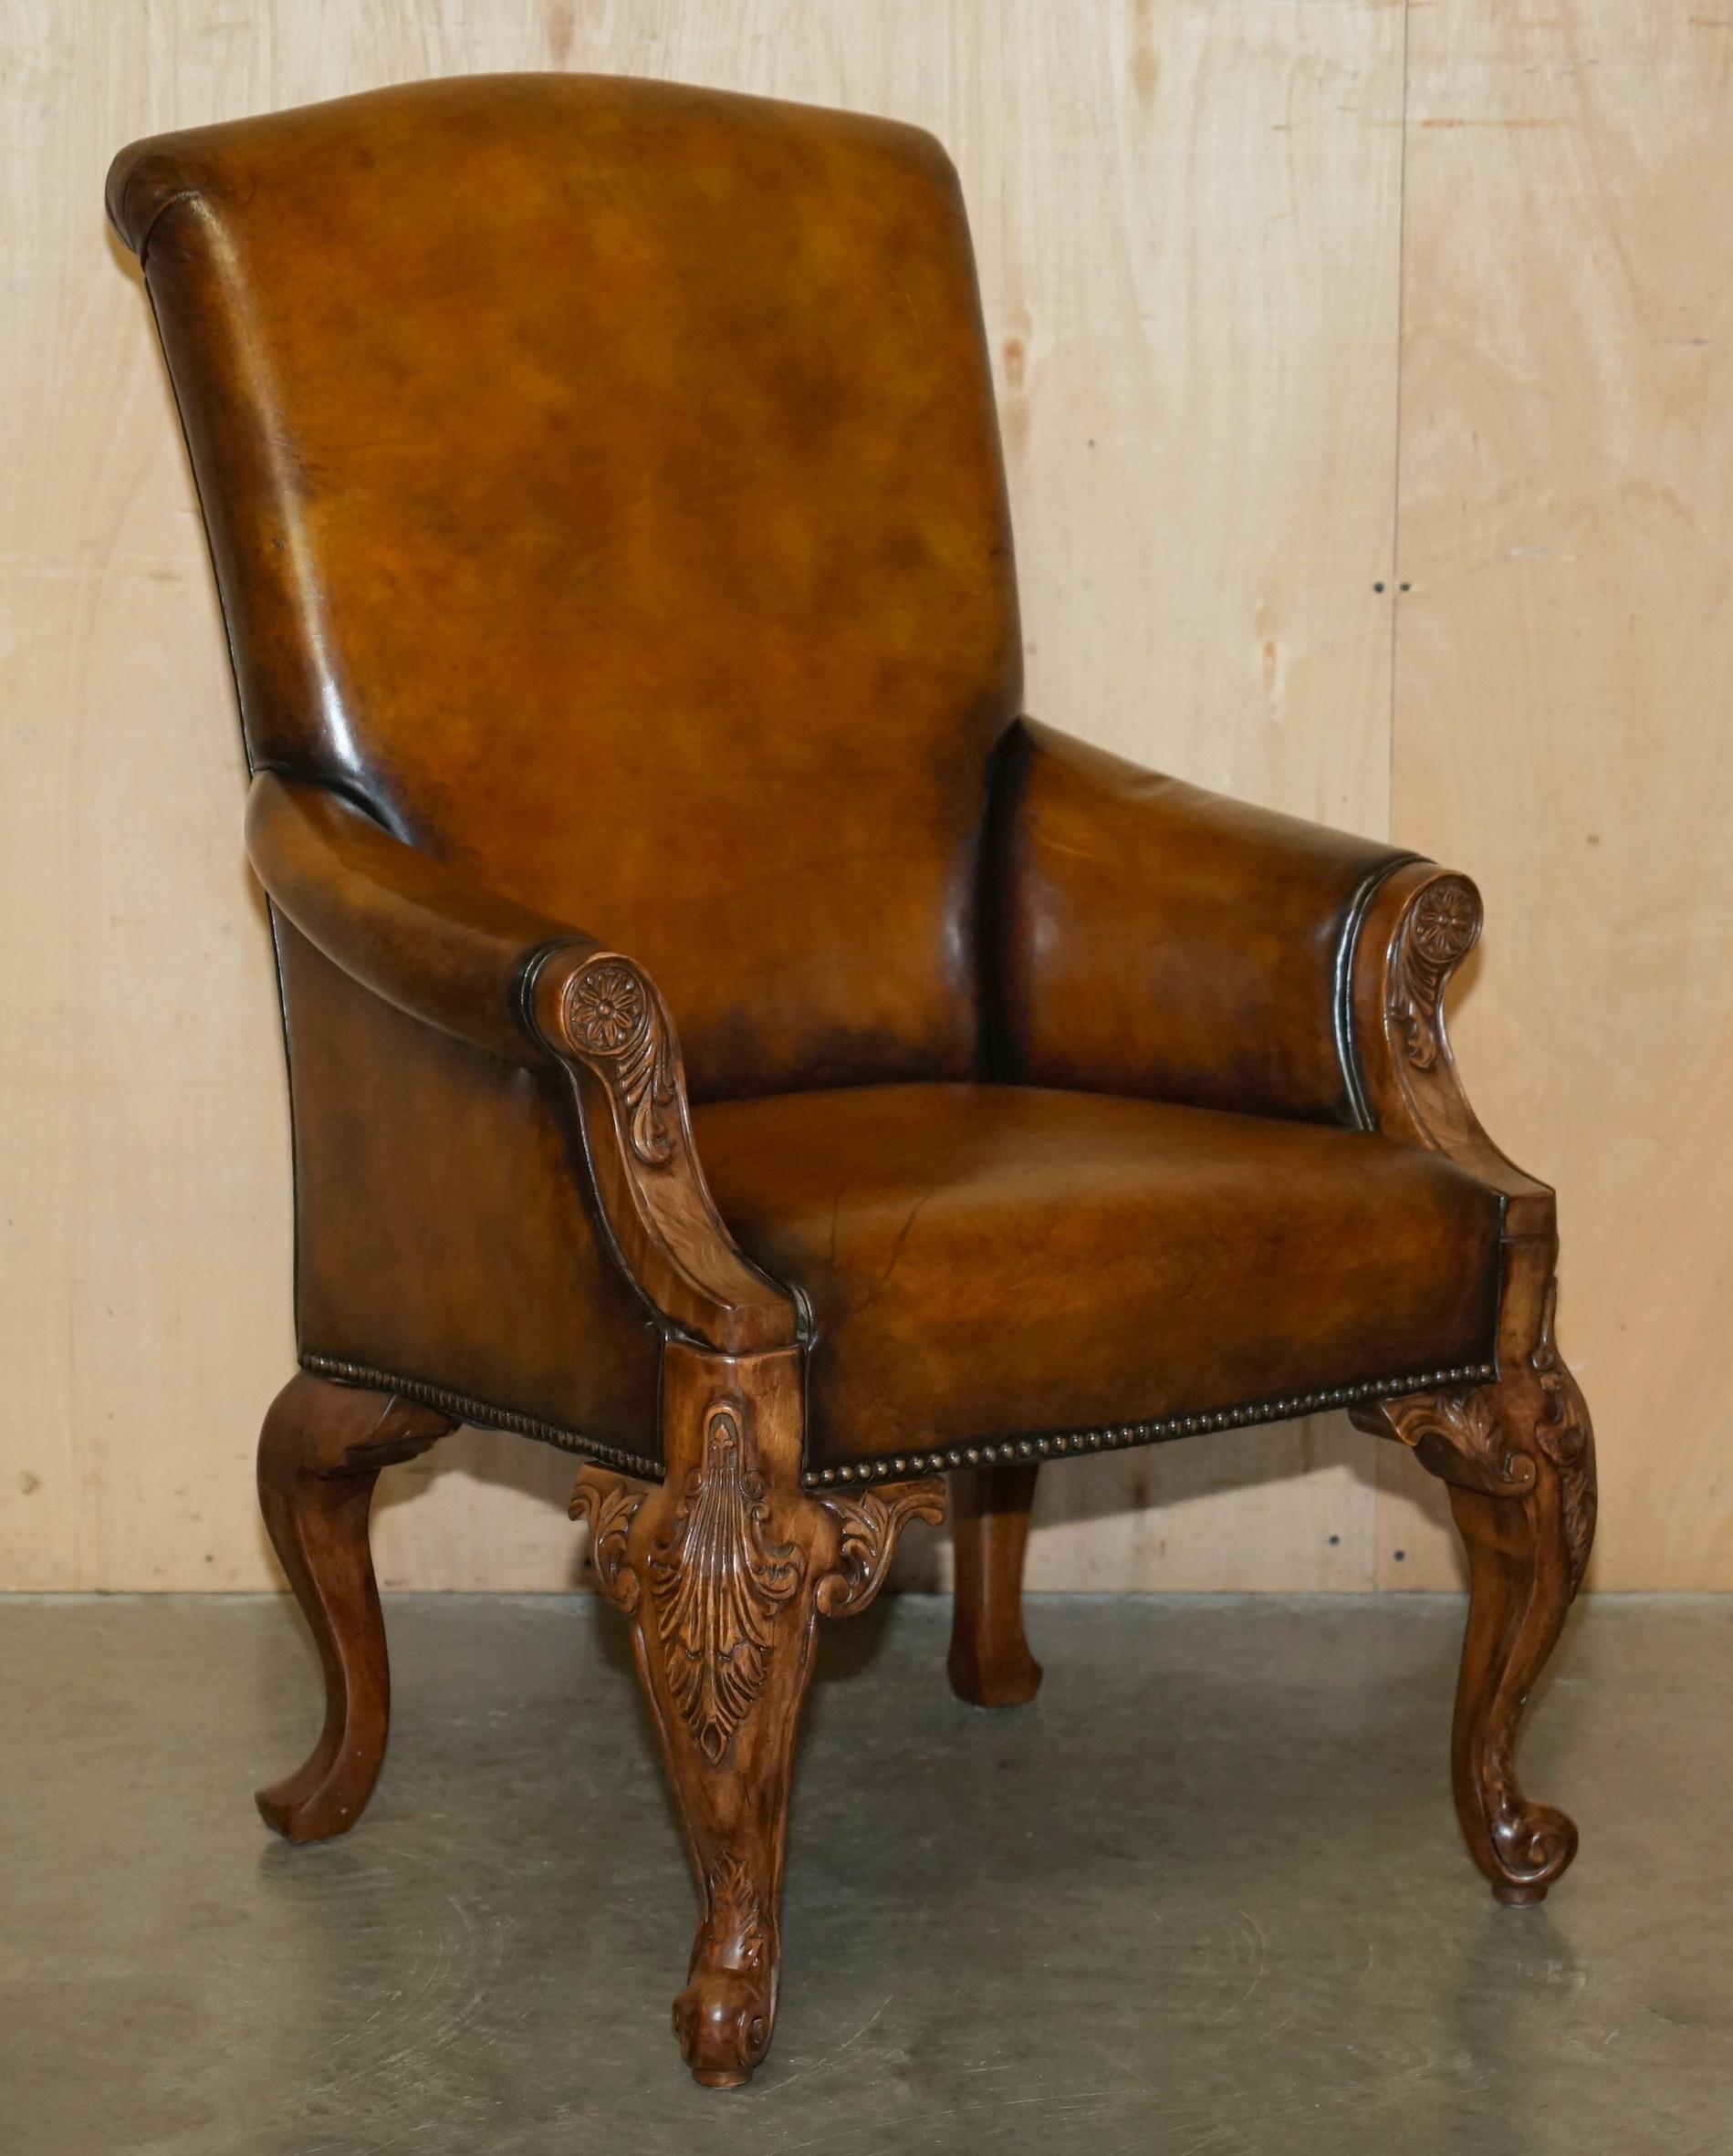 Royal House Antiques

Royal House Antiques is delighted to offer for sale this stunning pair of heavily carved large Antique throne armchairs in hand dyed brown leather 

Please note the delivery fee listed is just a guide, it covers within the M25